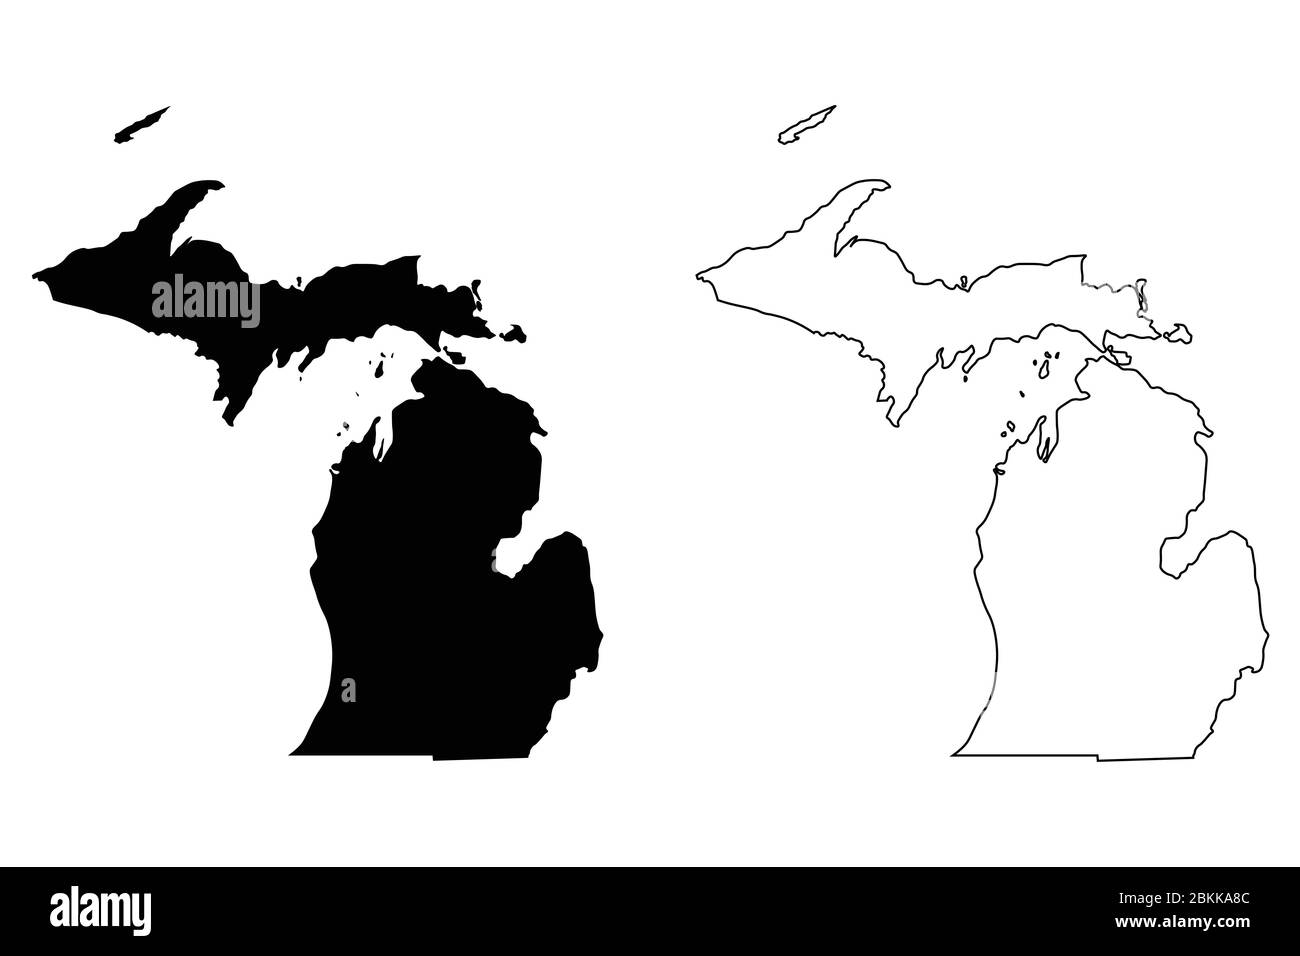 Michigan MI state Maps. Black silhouette and outline isolated on a white background. EPS Vector Stock Vector